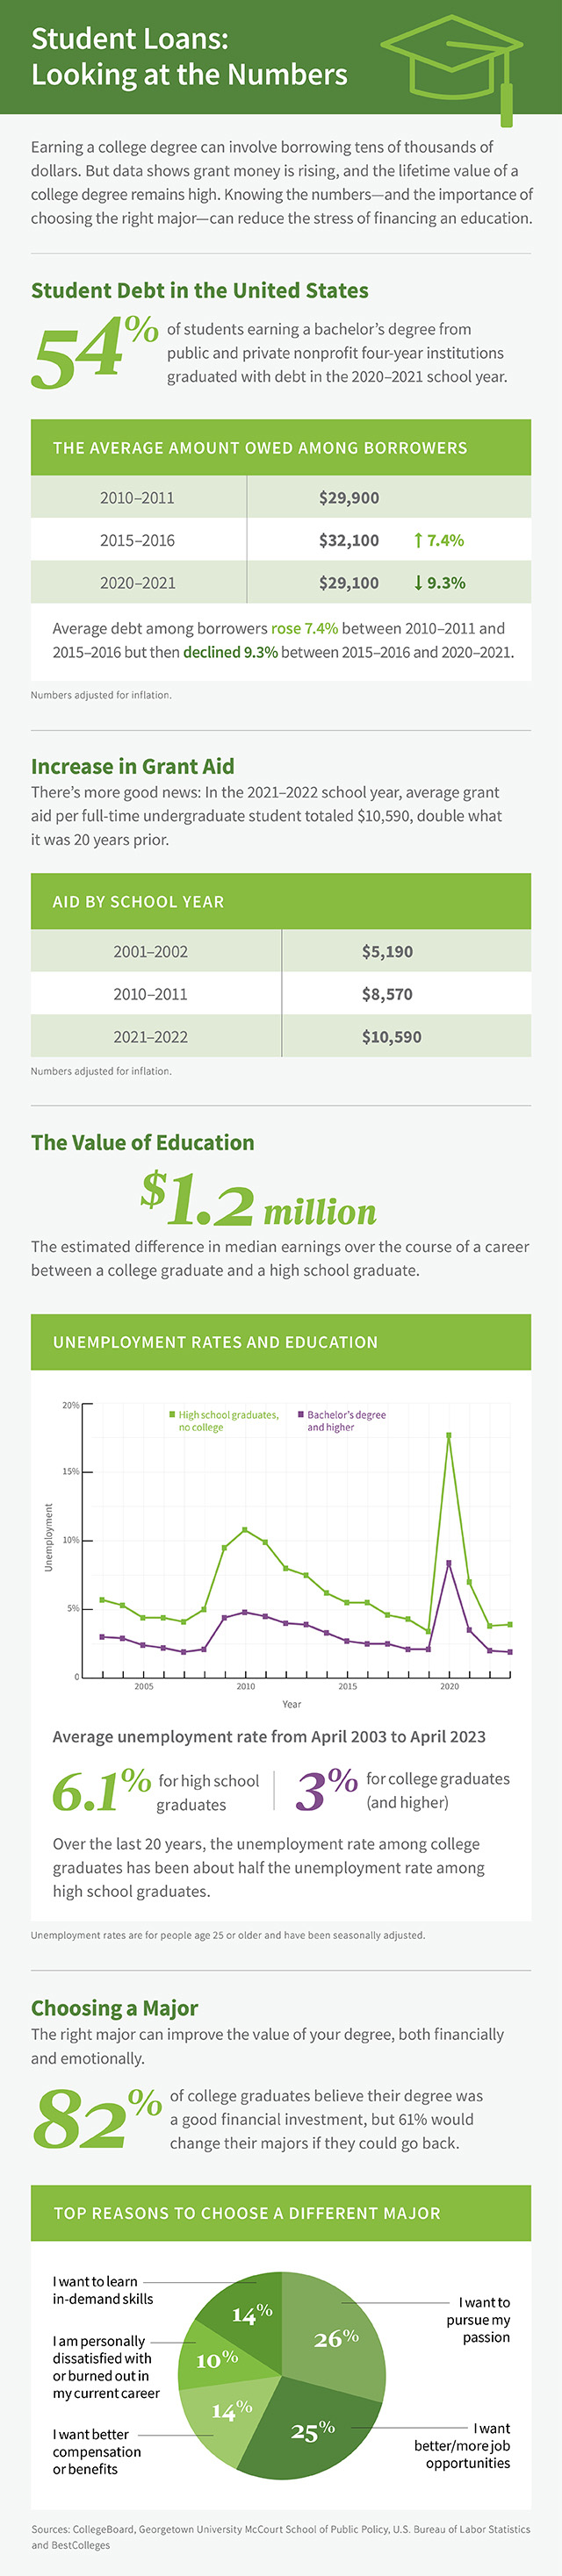 This graphic is called, “Student Loans: Looking at the Numbers.” There is an introduction and then a series of stats and charts. The introduction reads, “Earning a college degree can involve borrowing tens of thousands of dollars. But data shows grant money is rising, and the lifetime value of a college degree remains high. Knowing the numbers—and the importance of choosing the right major—can reduce the stress of financing an education.” The first box of the graphic is titled, “Student Debt in the United States.” There is a stat that reads, “54% of students earning a bachelor’s degree from public and private nonprofit four-year institutions graduated with debt in the 2020–2021 school year.” A Chart that shows, “The average amount owed among borrowers: 2010–2011: $29,900; 2015–2016: $32,100; and 2020–2021: $29,100.” Annotations on the chart read “Average debt among borrowers rose 7.4% between 2010–2011 and 2015–2016 but then declined 9.3% between 2015–2016 and 2020–2021.” A note says that “(Numbers adjusted for inflation.)” The next box is titled, “Increase in Grant Aid.” It reads, “There’s more good news: In the 2021–2022 school year, average grant aid per full-time undergraduate student totaled $10,590, double what it was 20 years prior.” A chart in this section shows the grant numbers: “2001–2002: $5,190; 2010–2011: $8,570; and 2021–2022: $10,590.” A note says that “(Numbers adjusted for inflation.)” The next box is titled, “The Value of Education” and reads, “A college degree may involve taking on debt, but it also pays off over a lifetime.” A statistic reads, “$1.2 million: The estimated difference in median earnings over the course of a career between a college graduate and a high school graduate. Plus, over the last 20 years, the unemployment rate among college graduates has been about half the unemployment rate among high school graduates.” A chart in this section shows the, “Average unemployment rate from April 2003 to April 2023.” It was, “6.1% for high school graduates” and “3% for college graduates (and higher).” A note says that “(Based on seasonally adjusted monthly unemployment rates.)” The next box is titled, “Choosing a Major.” It reads, “The right major can improve the value of your degree, both financially and emotionally.” A statistic reads, “82% of college graduates believe their degree was a good financial investment, but 61% would change their majors if they could go back.” A pie chart shows the “Top reasons to choose a different major: I want to pursue my passion: 26%; I want better/more job opportunities: 25%; I want better compensation or benefits: 14%; I am personally dissatisfied with or burned out in my current career: 10%; and I want to learn in-demand skills: 14%.” The sources for the graphic reads, “Sources: CollegeBoard, Georgetown University McCourt School of Public Policy, U.S. Bureau of Labor Statistics and BestColleges.”